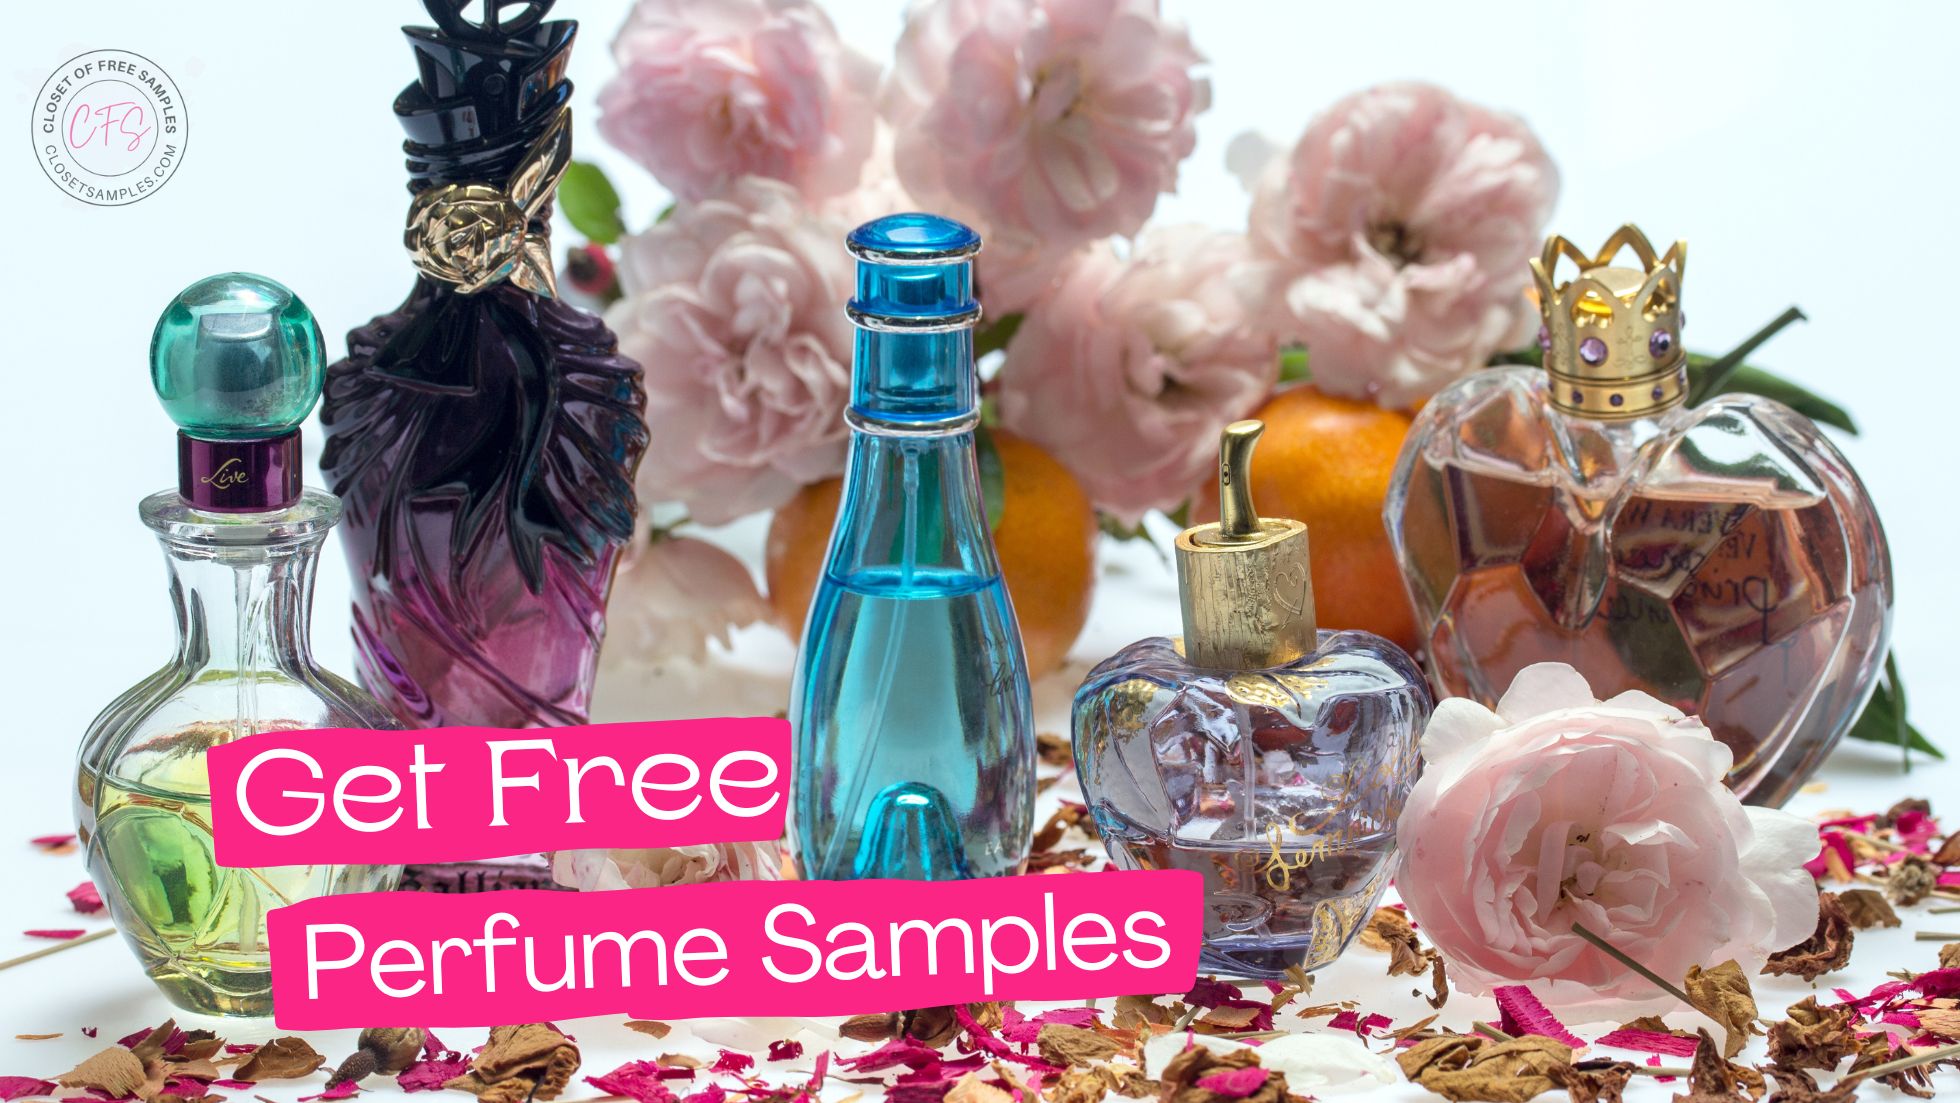 How To Get FREE Perfume Samples By Mail closetsamples